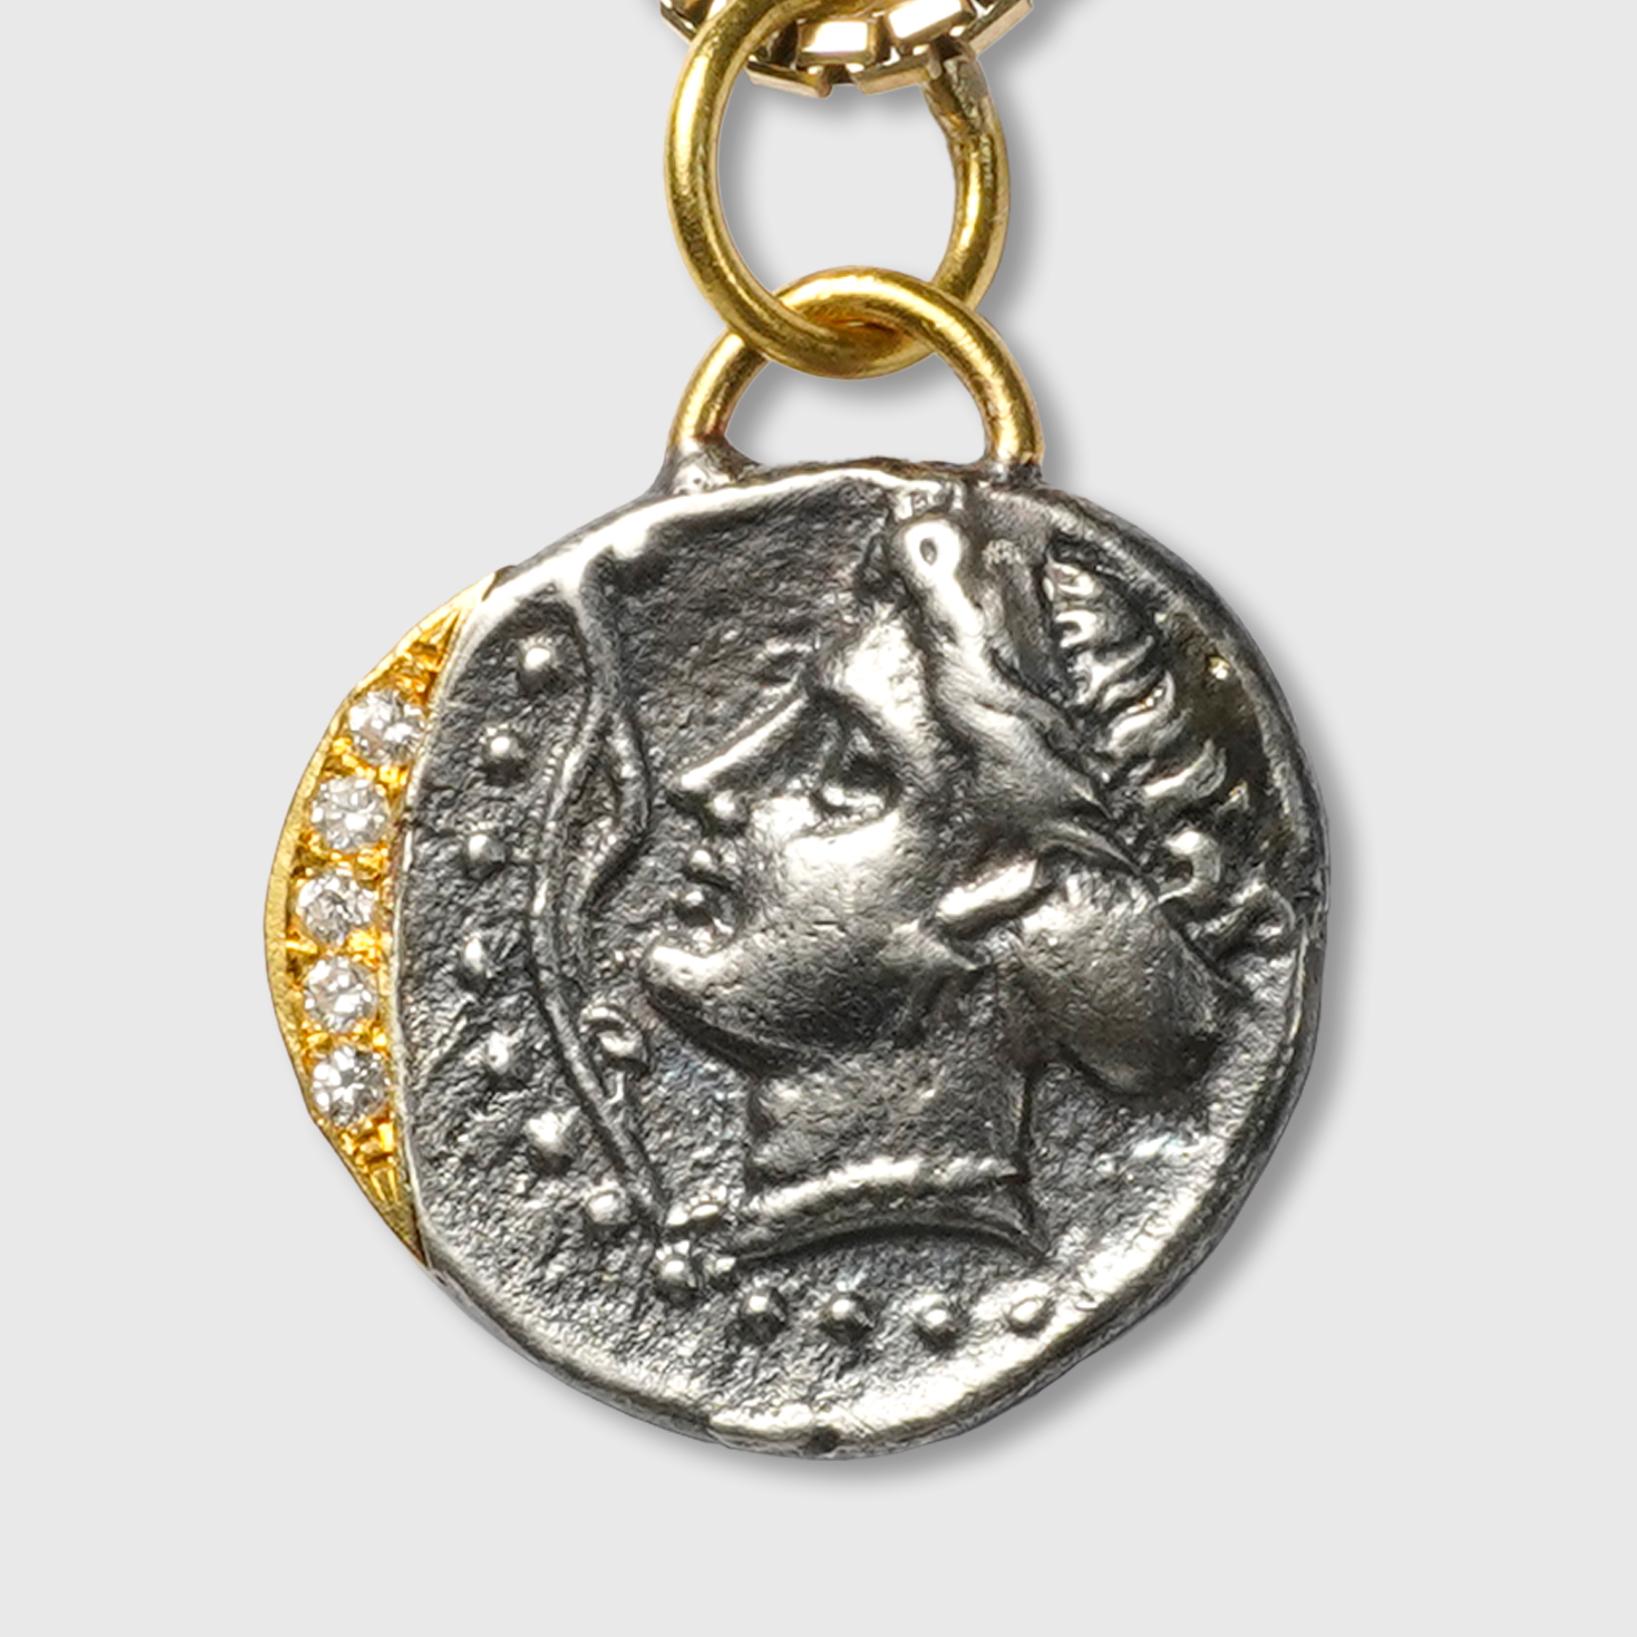 Classical Greek Ancient Sinope Water Nymph Coin Replica Charm Pendant, 24K Gold Silver Diamonds For Sale